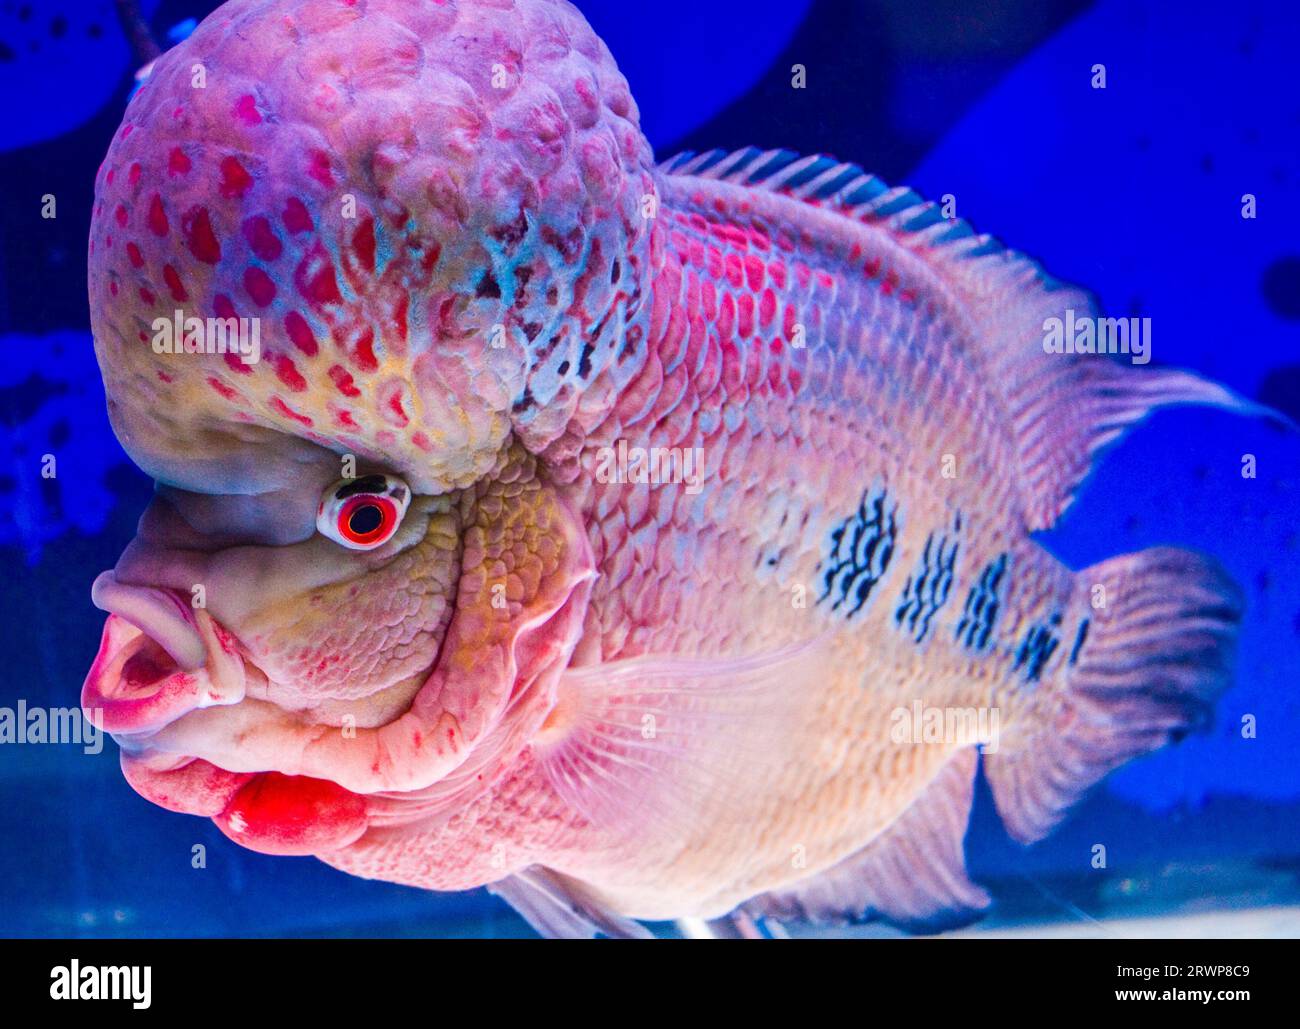 Flowerhorn cichlid freshwater fish with spiny fins Stock Photo